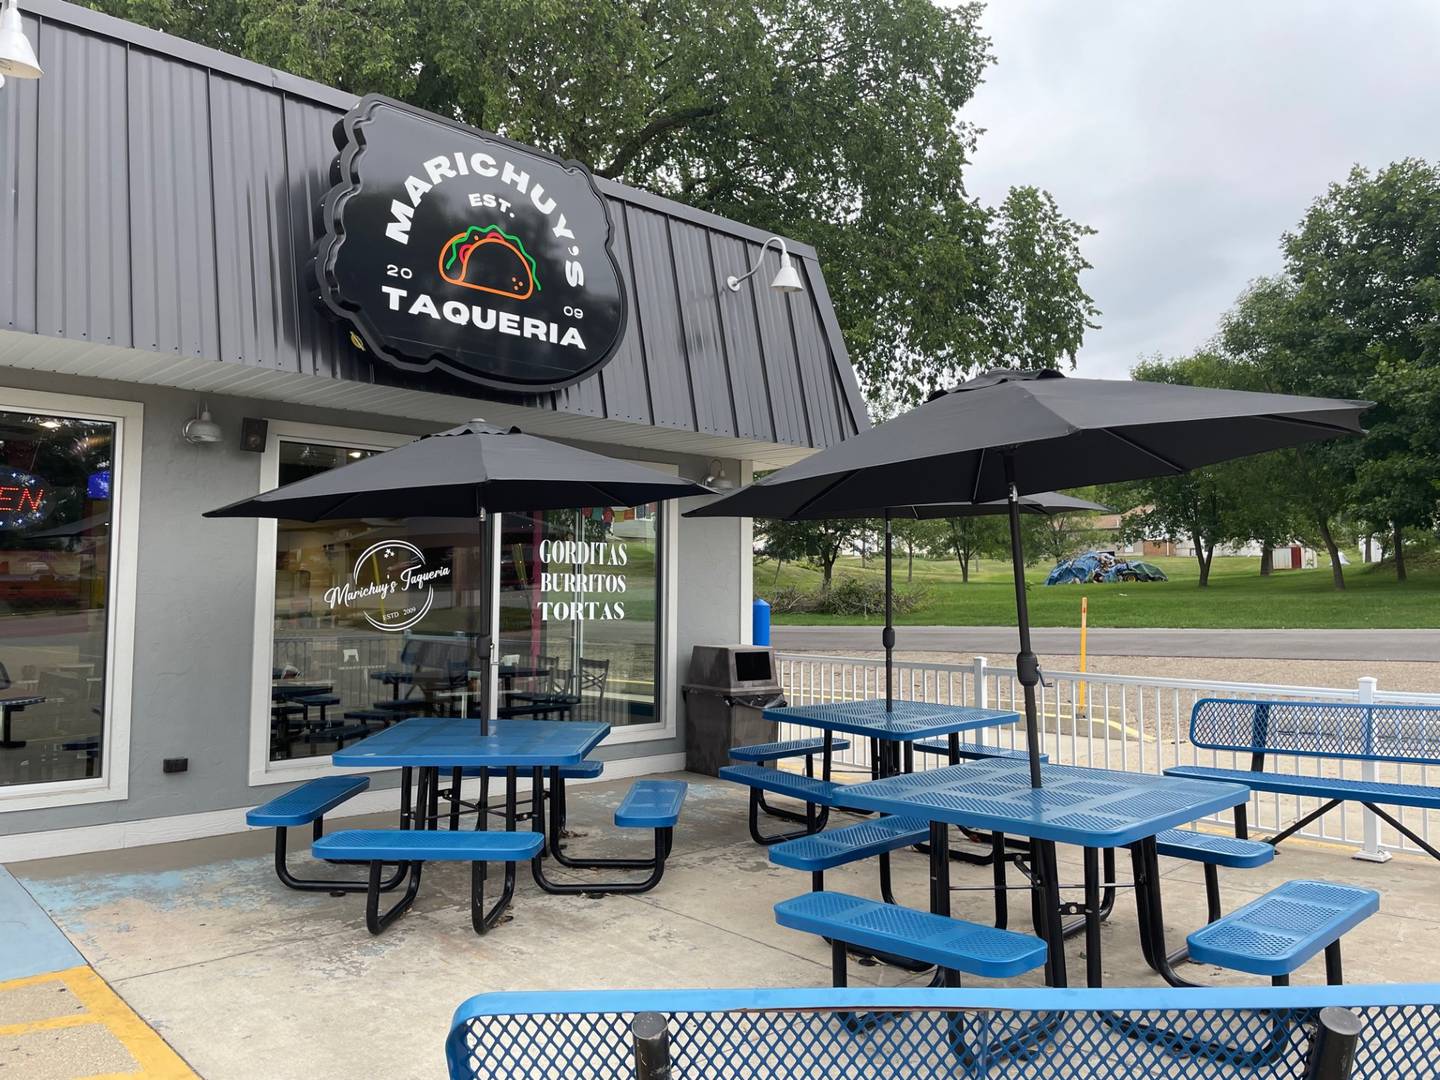 Marichuy’s Taqueria, located at 502 S. Spalding St., Spring Valley, includes outdoor seating as well as a drive-up window.